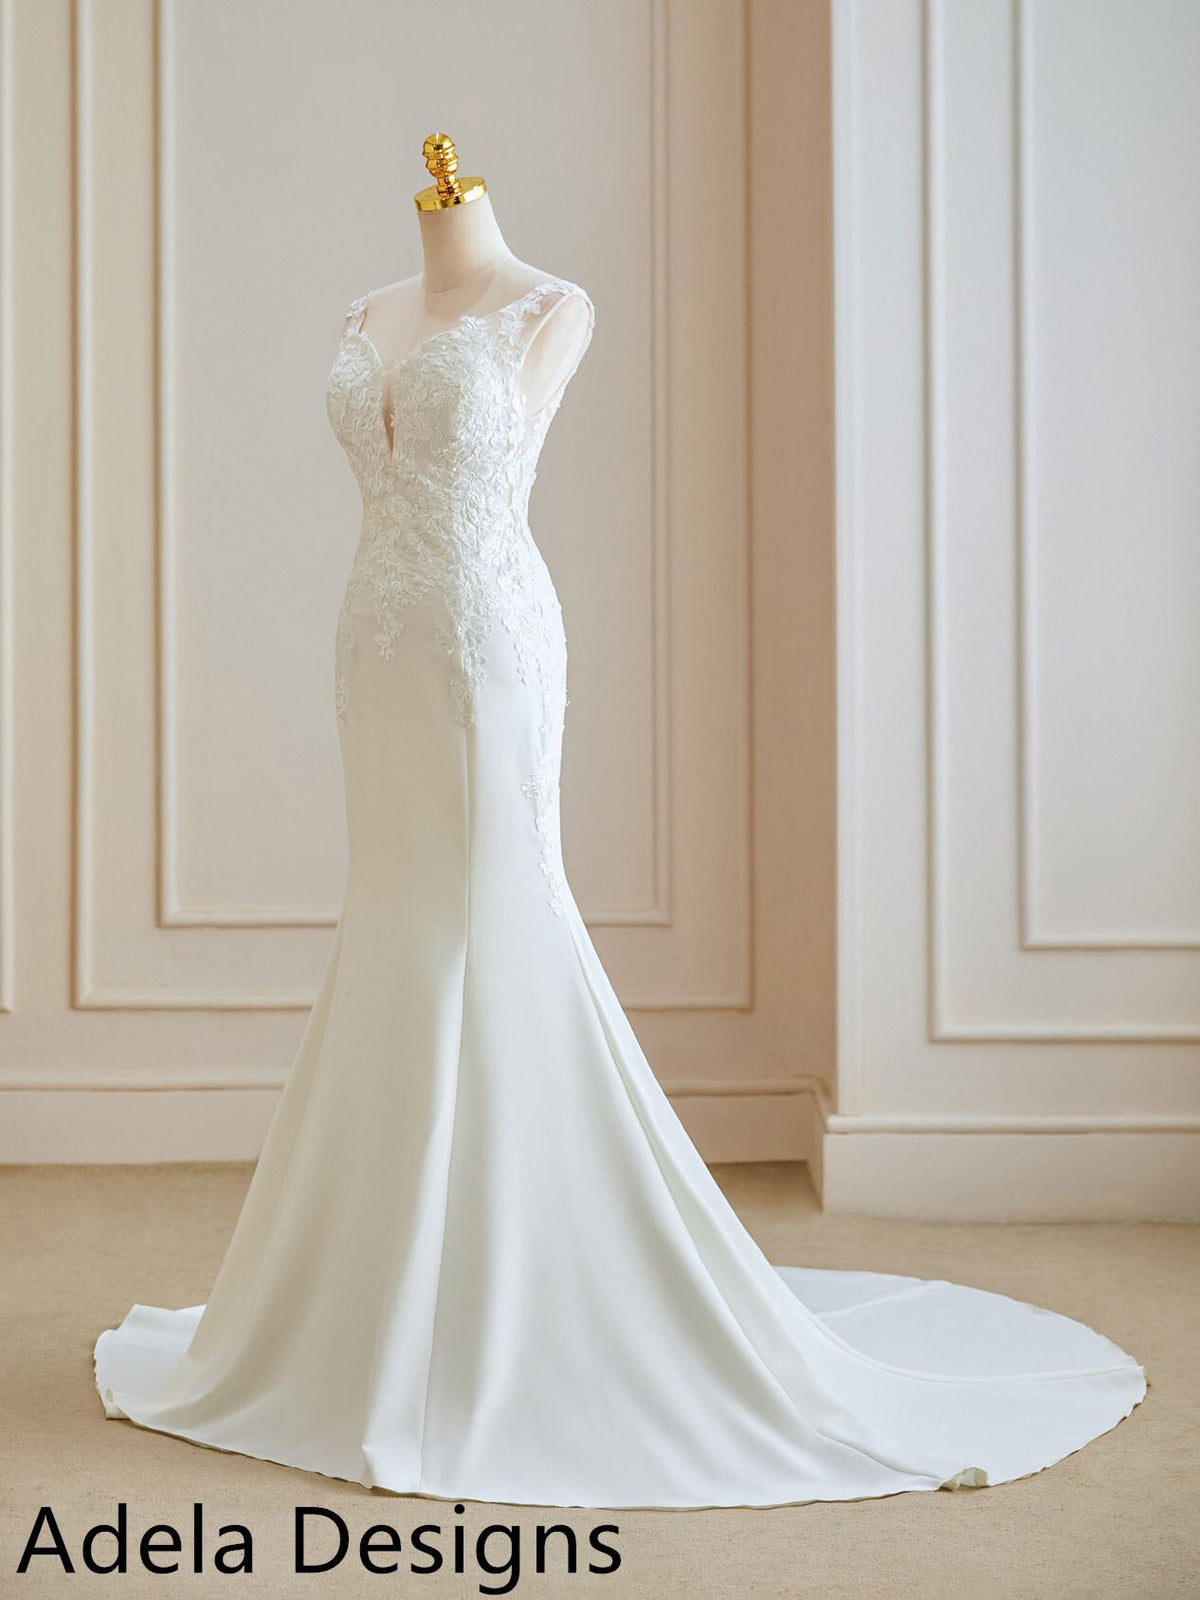 Mermaid Crepe Wedding Dress Bridal Gown Sweetheart Split Neckline Sleeveless with Straps Low Open Back Fit and Flare